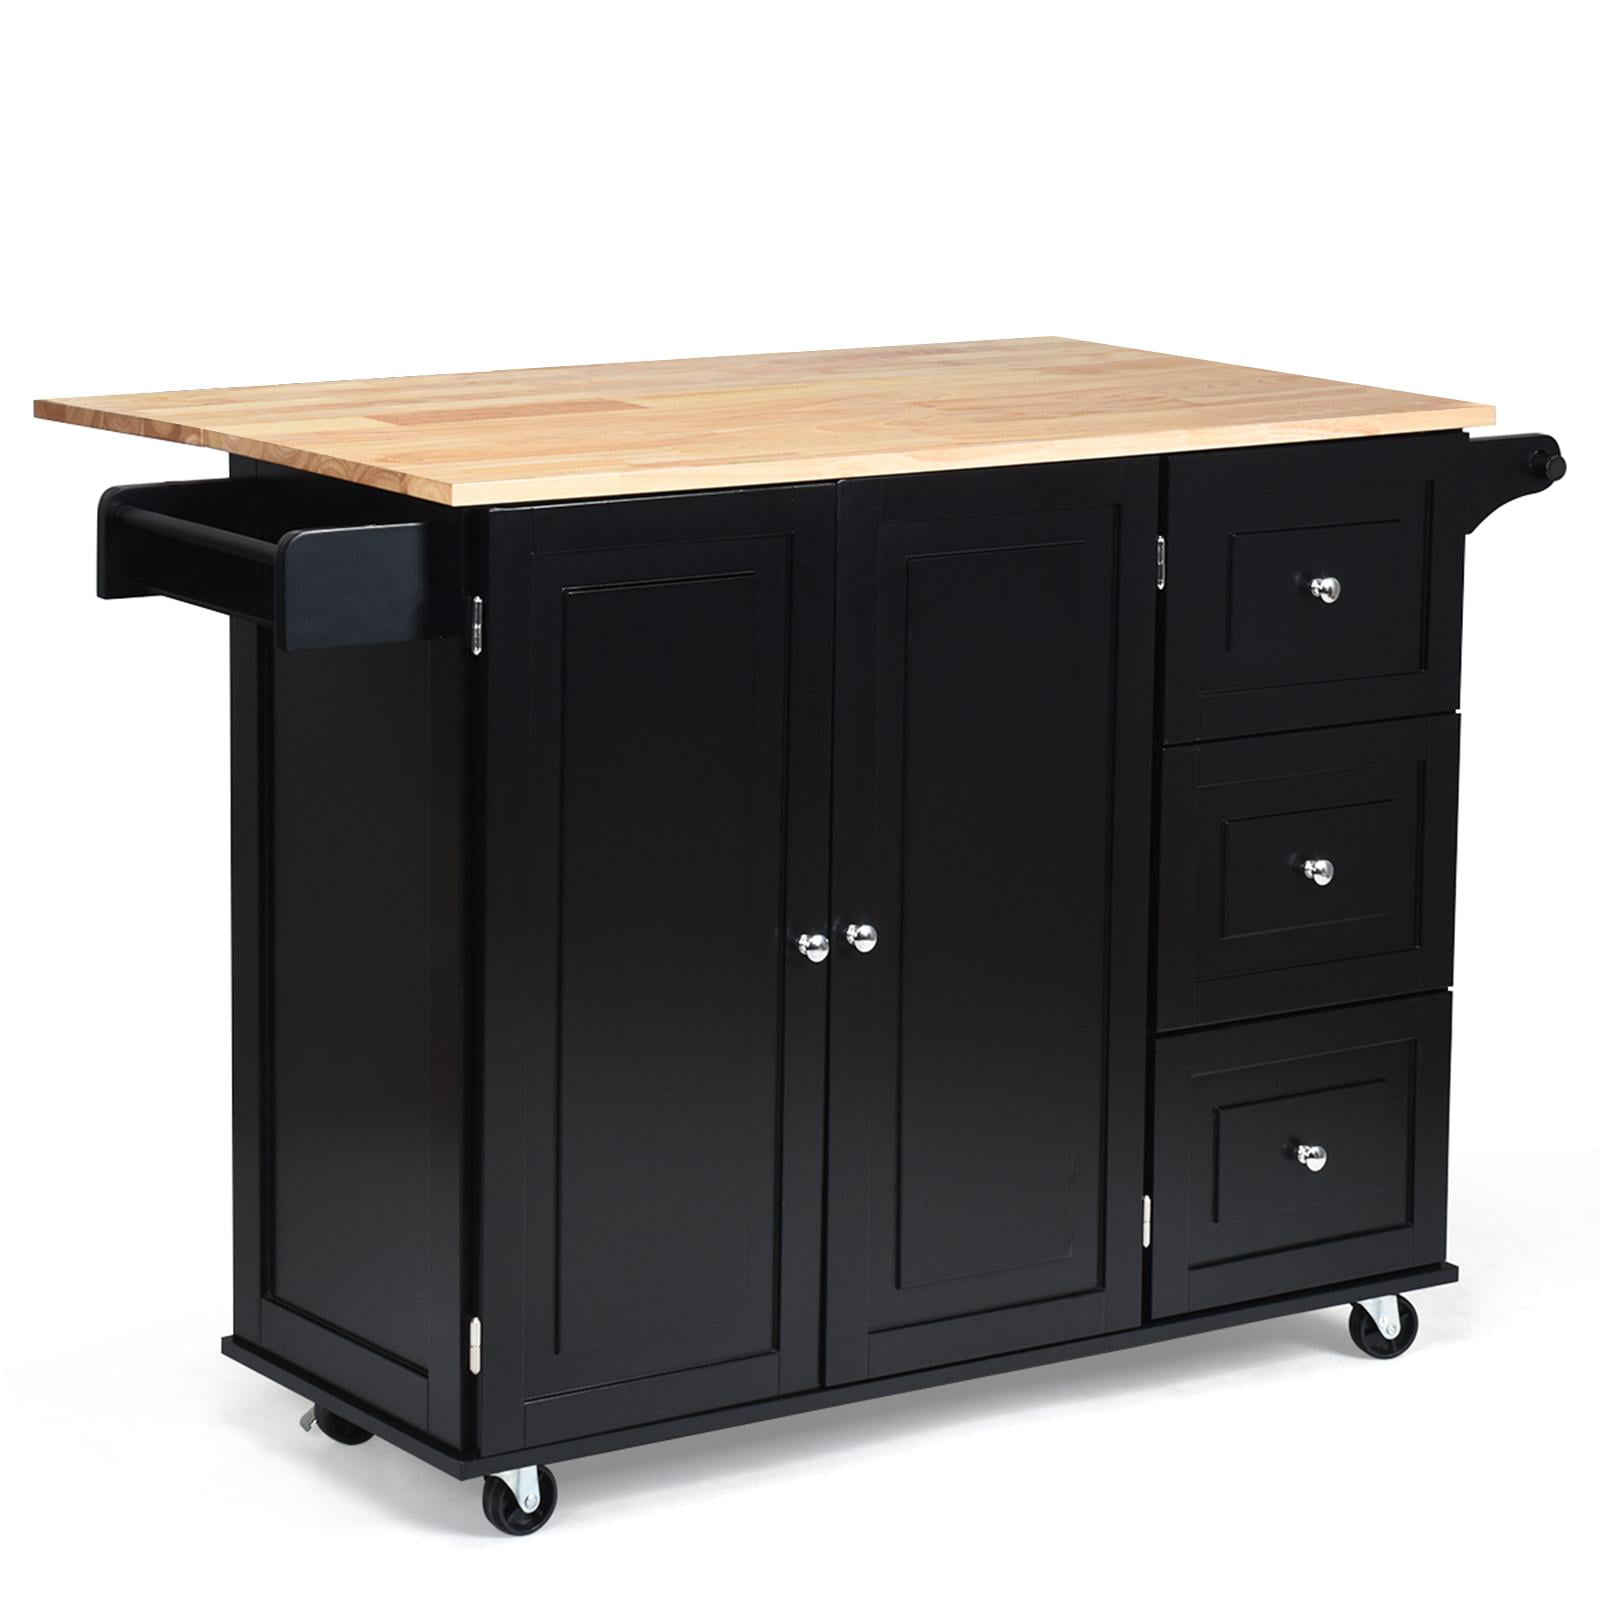 Buy Giantex Kitchen Island Cart with Drop-Leaf Tabletop, Large Trolley ...